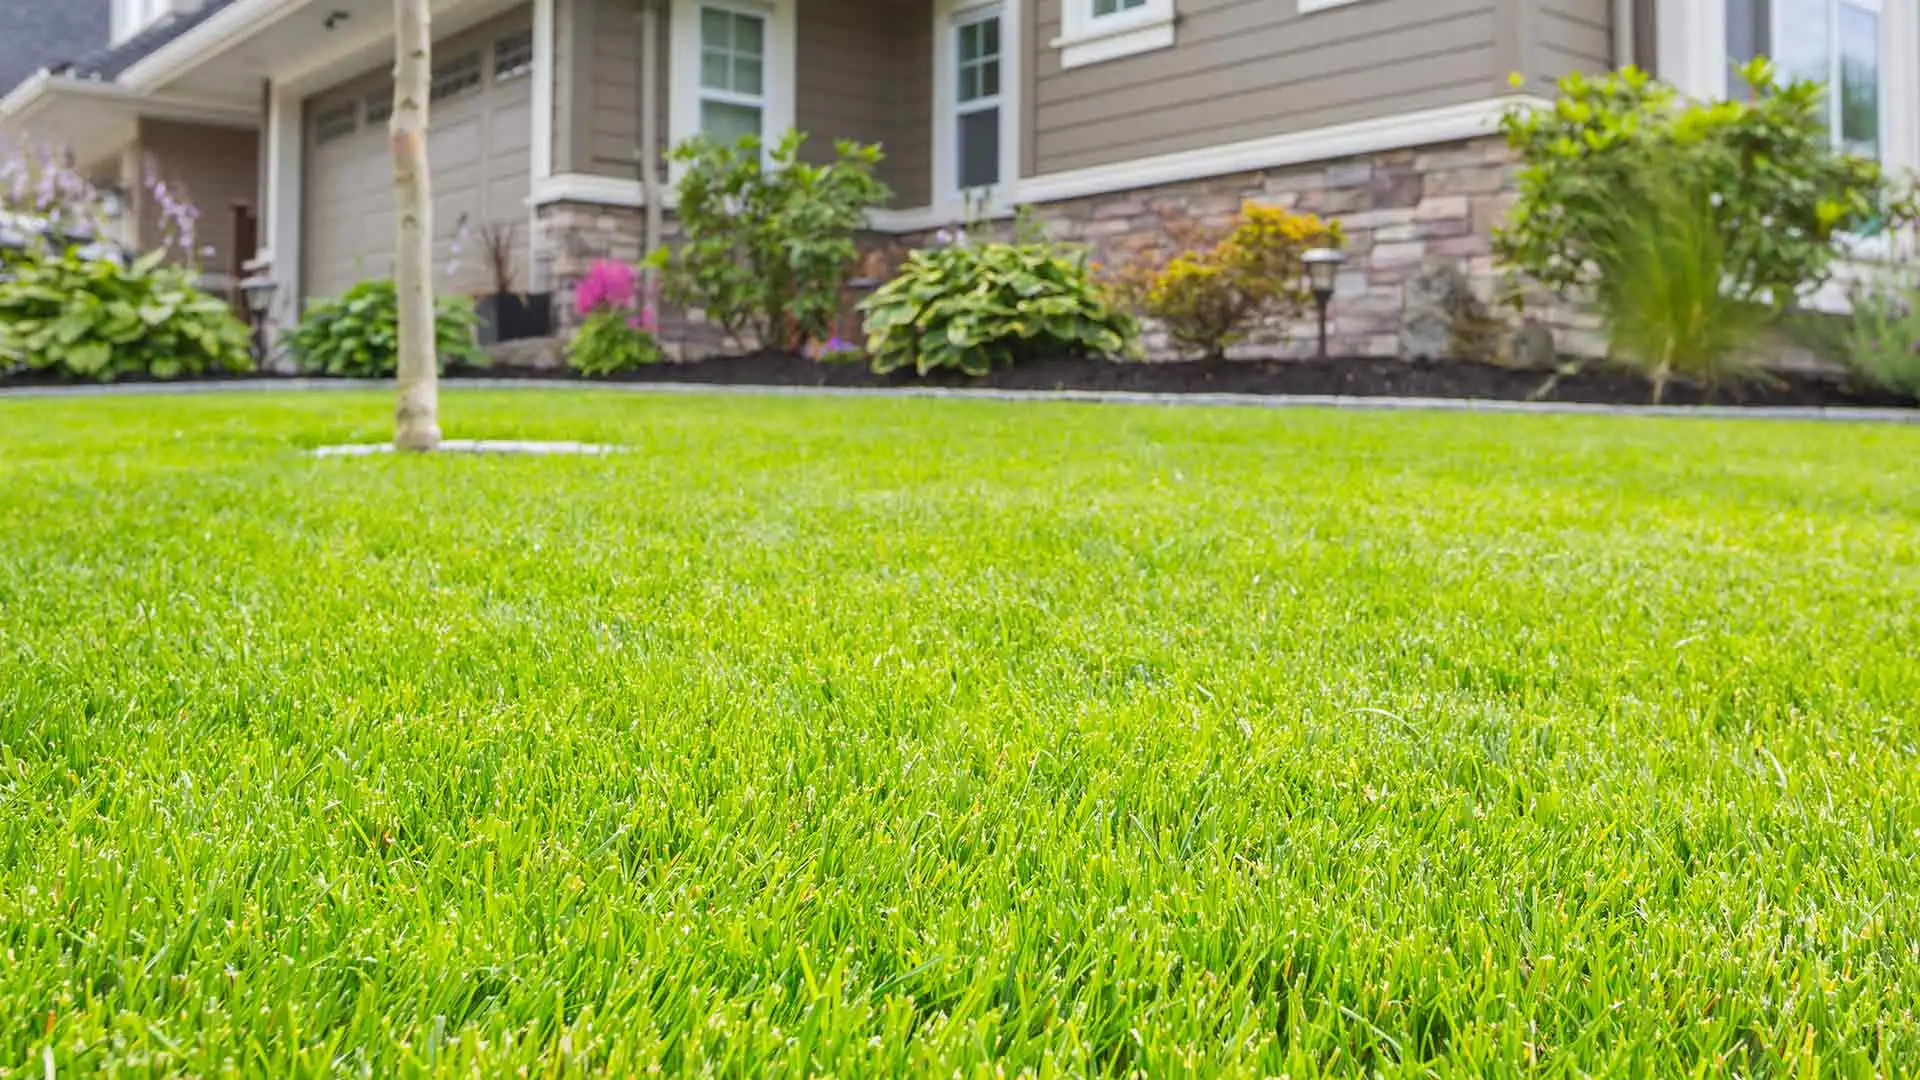 A Bethalto, IL property with regular lawn care services.